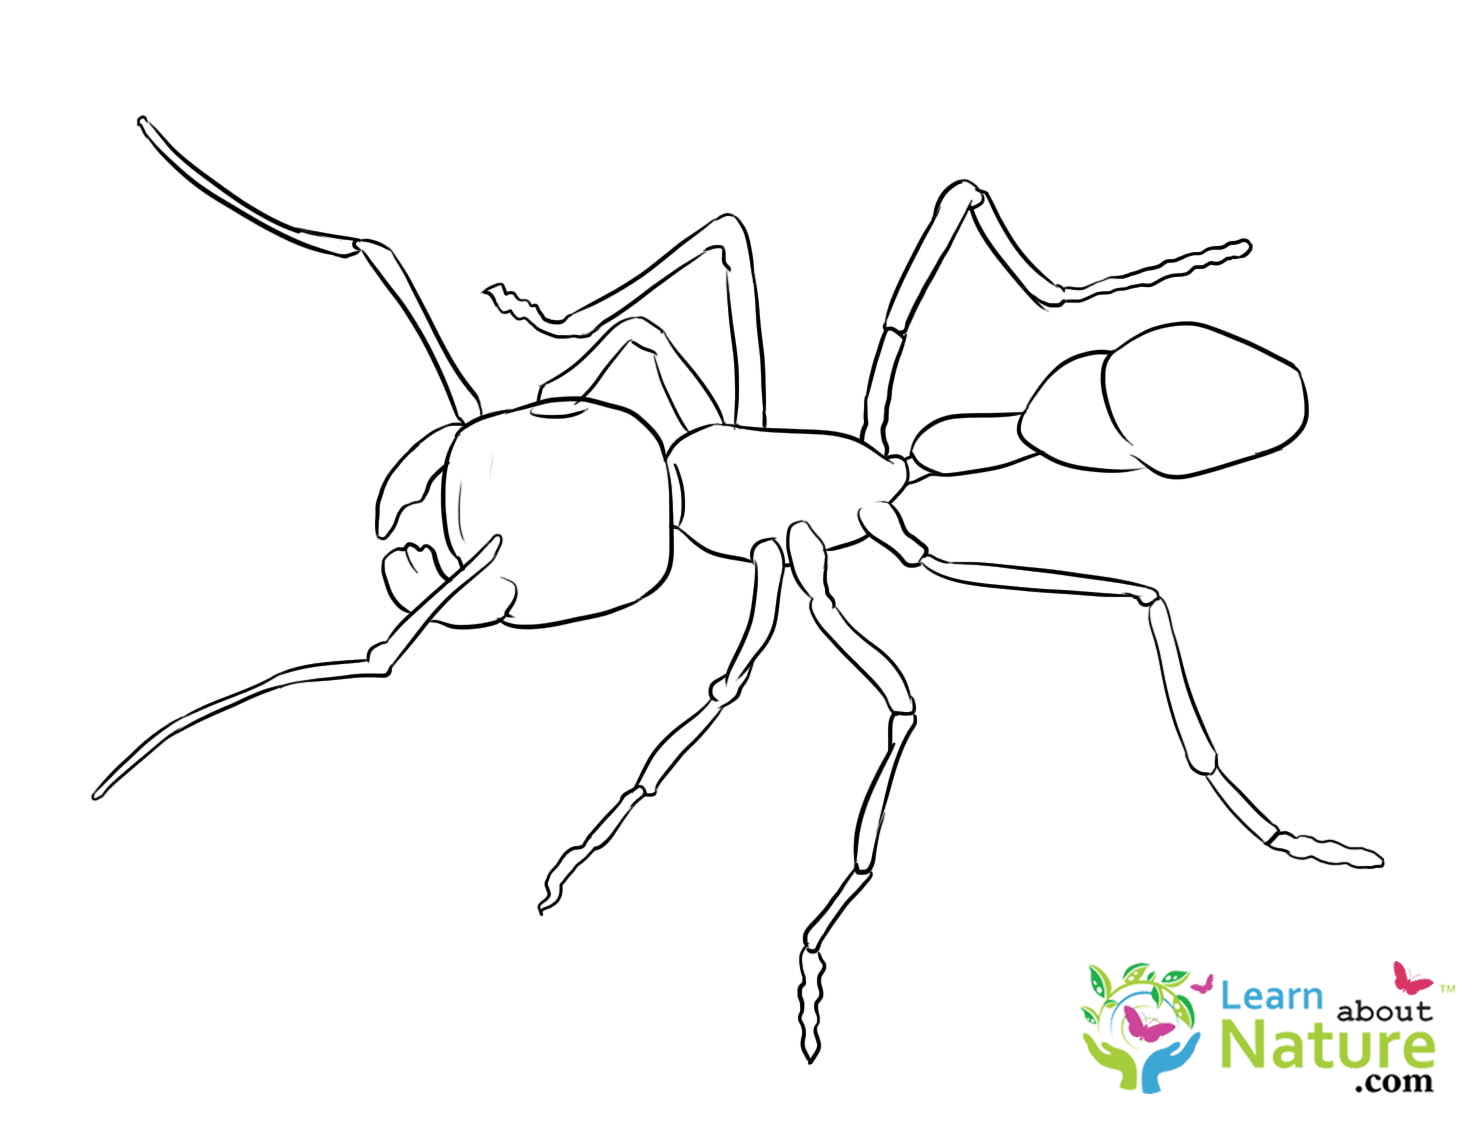 View Coloring Page Of Ants PNG